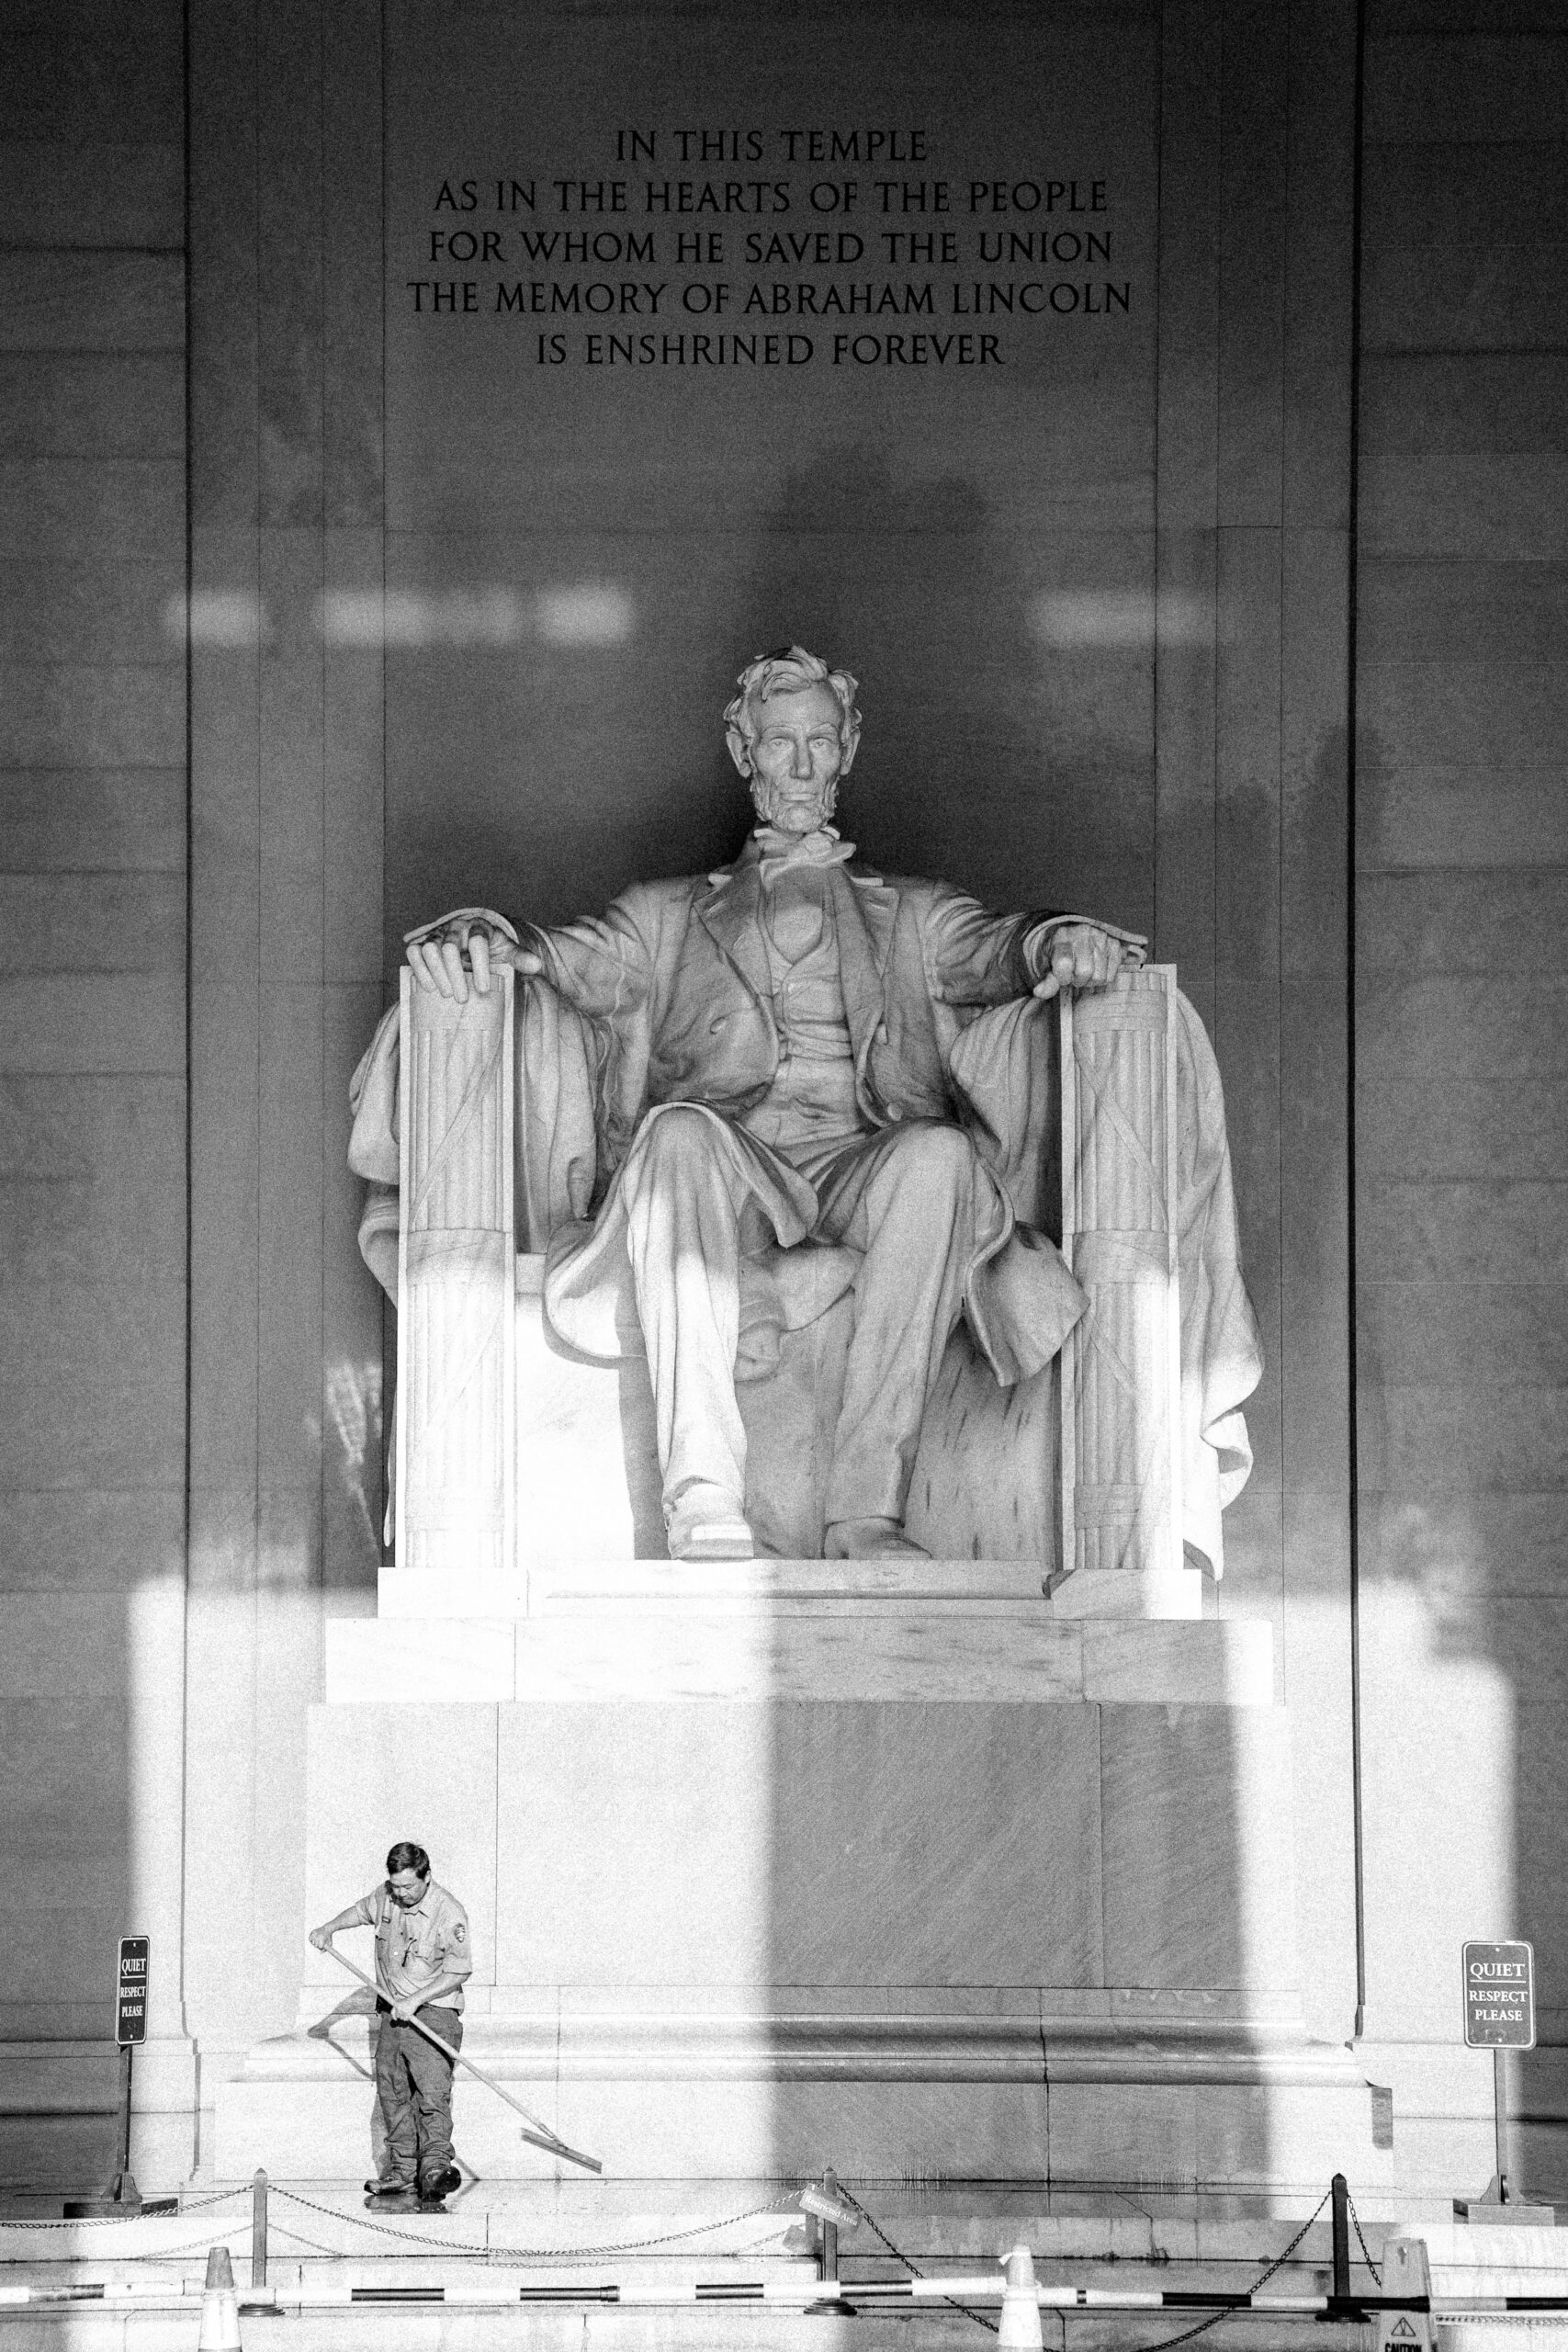 A photo of the Lincoln memorial with a cleaning worker at the base